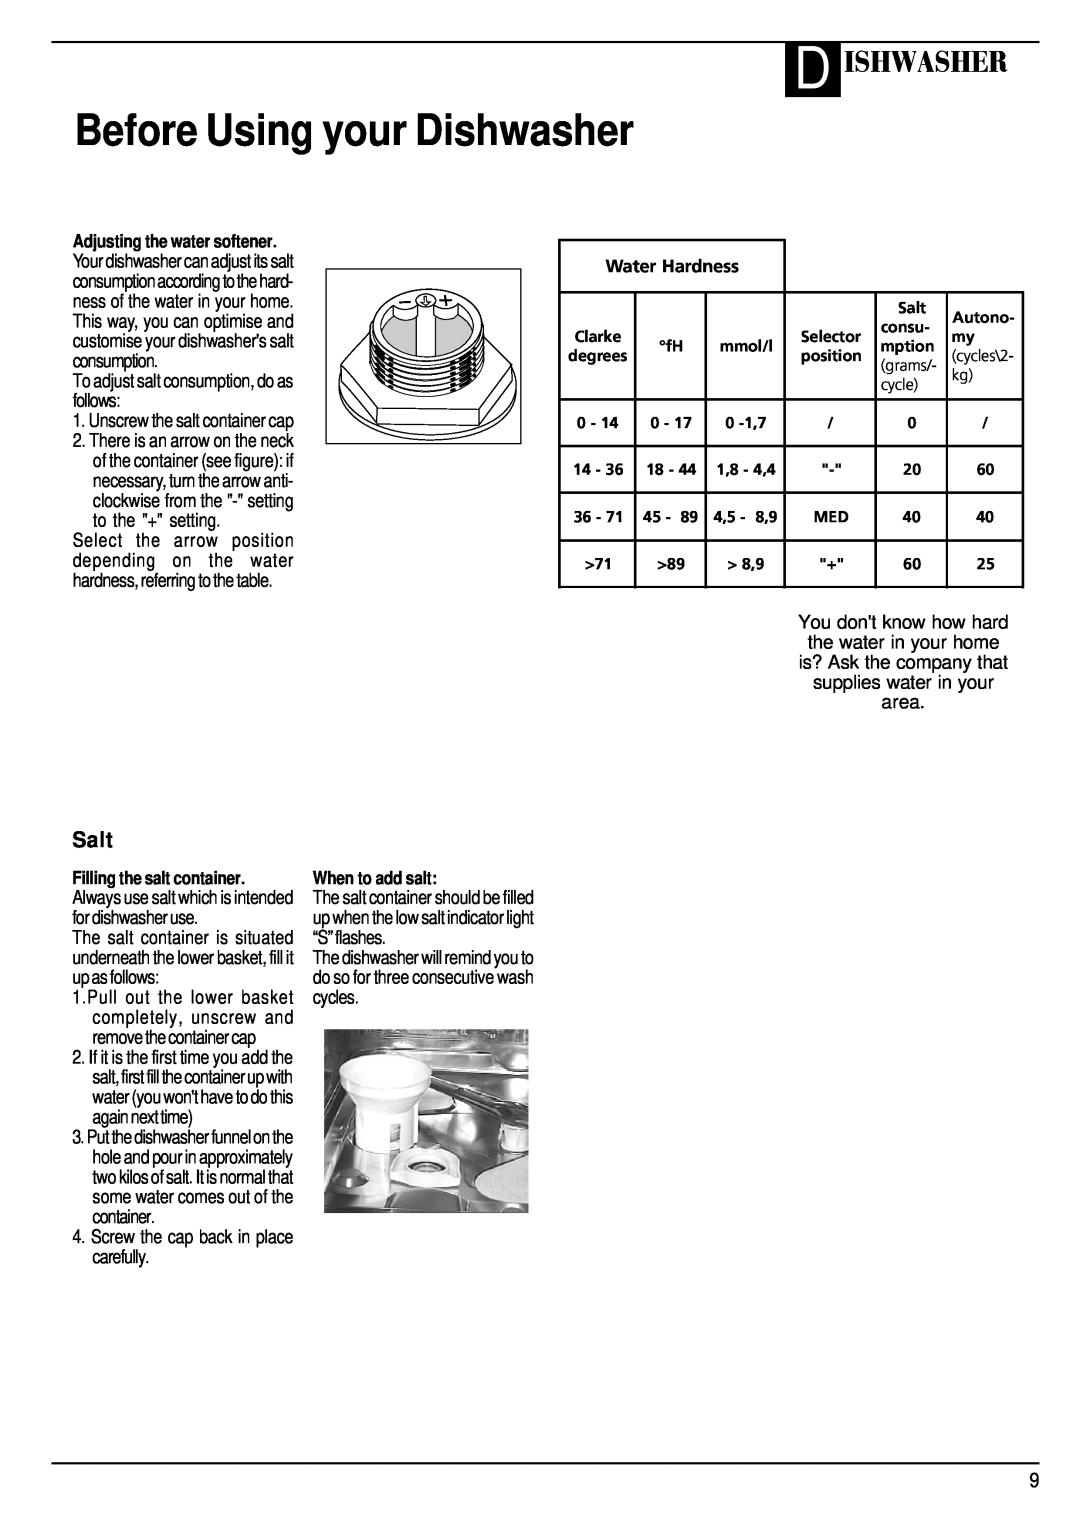 Hotpoint BFI68 manual Before Using your Dishwasher, D Ishwasher, Salt, Unscrew the salt container cap, Water Hardness 